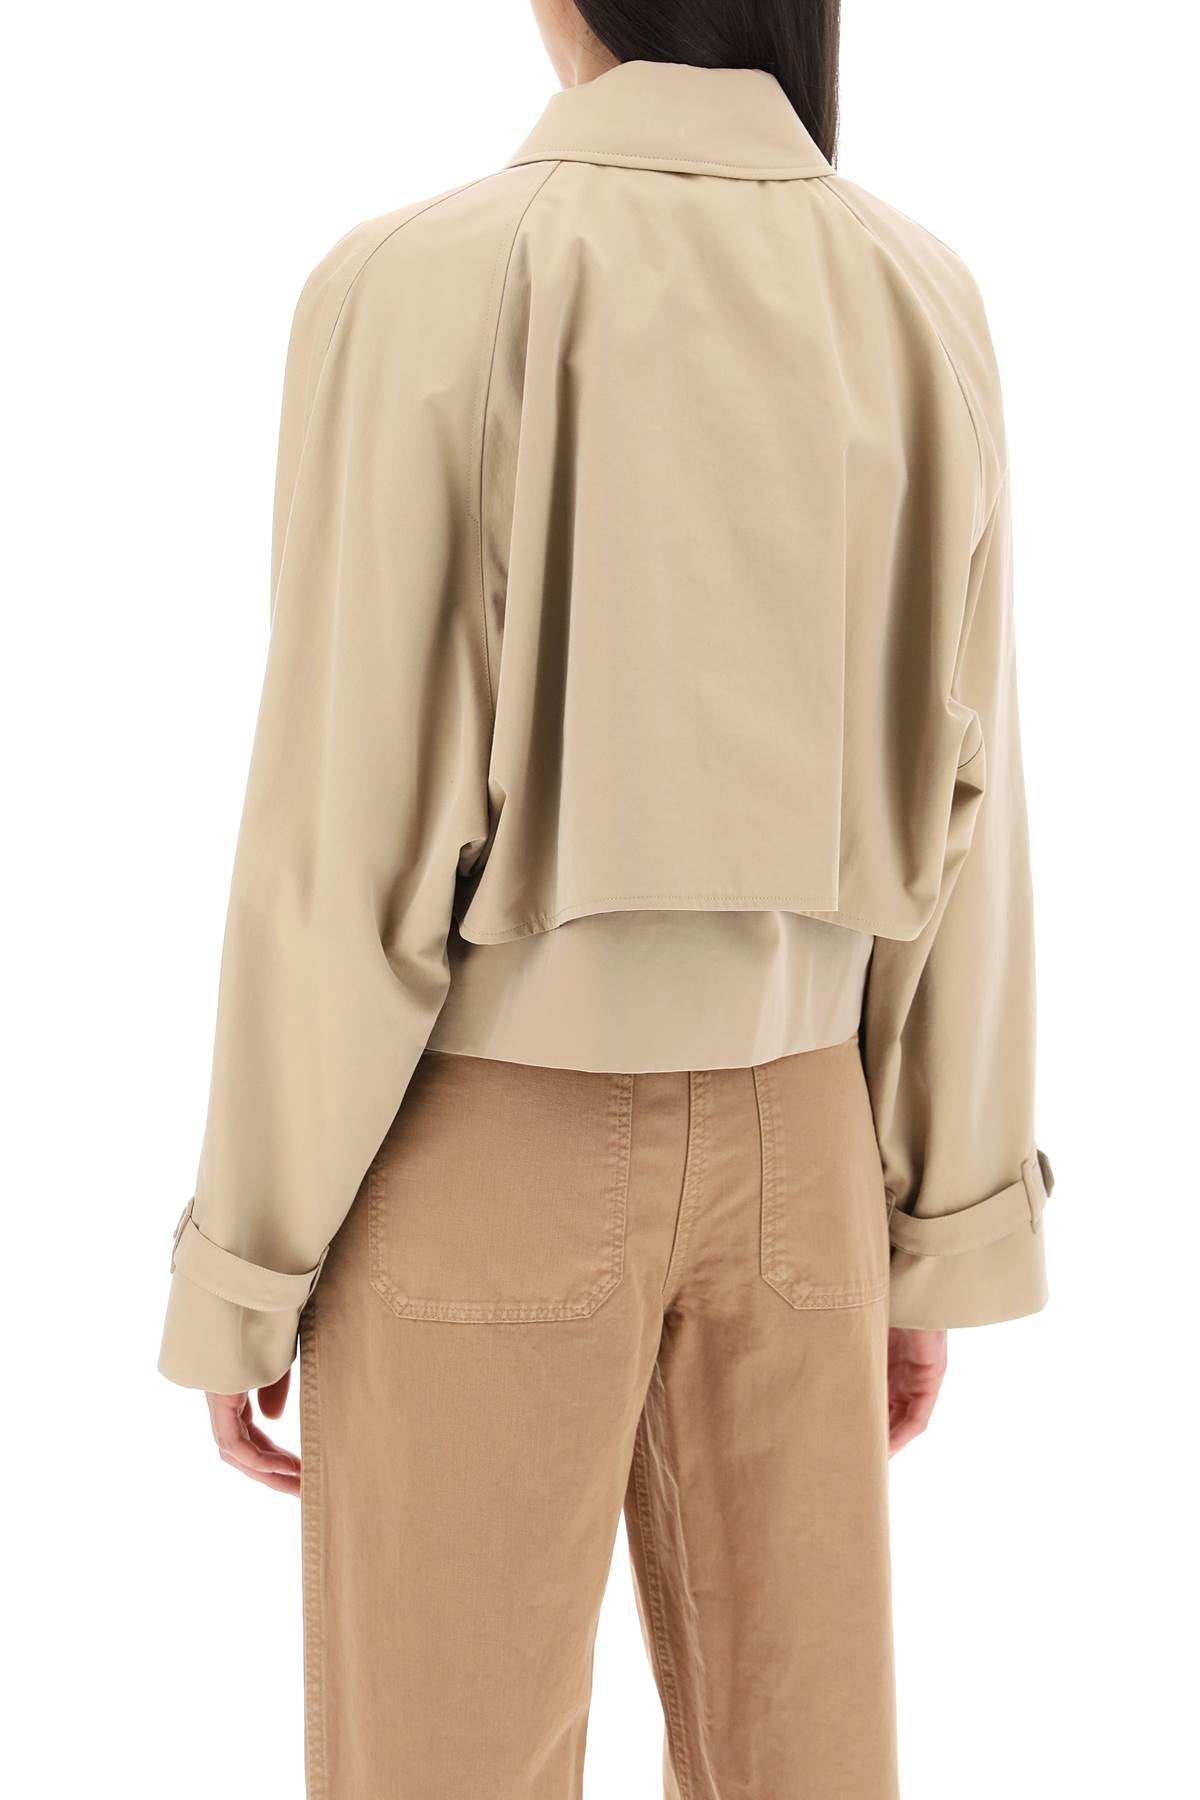 BURBERRY Vintage-Inspired Beige Cropped Jacket for Women